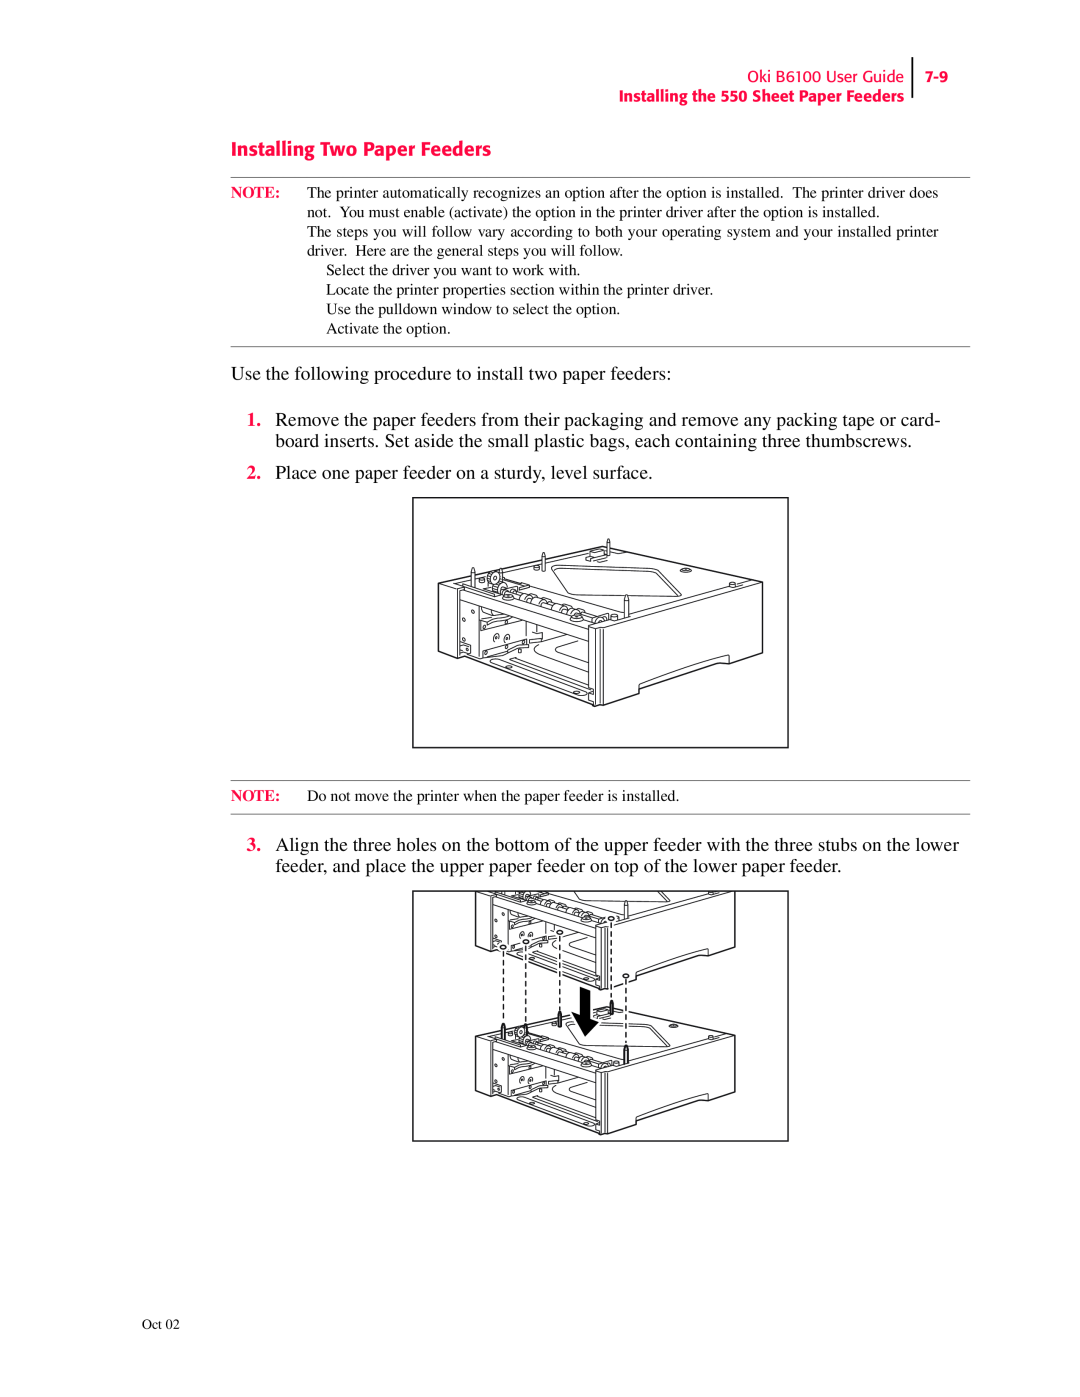 Oki 6100 manual Installing Two Paper Feeders, Use the following procedure to install two paper feeders 